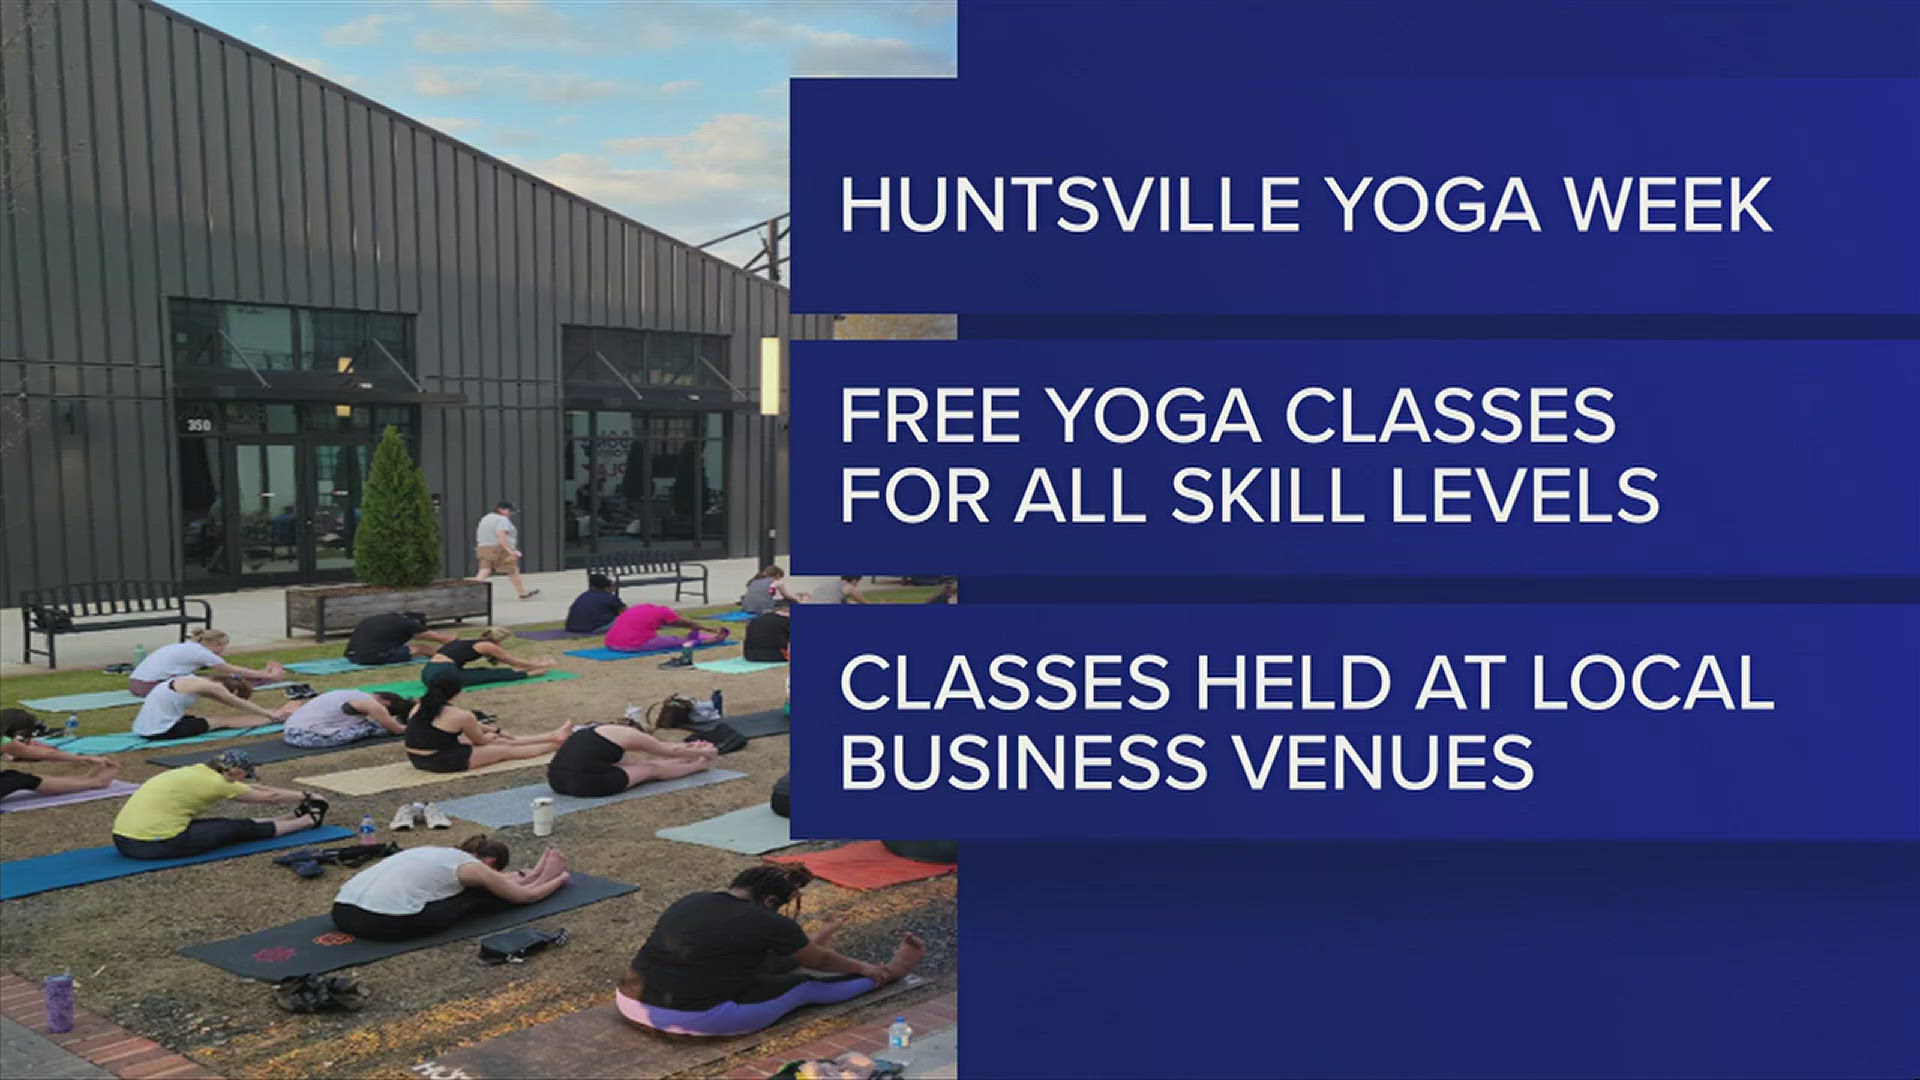 Free yoga classes for all skill levels